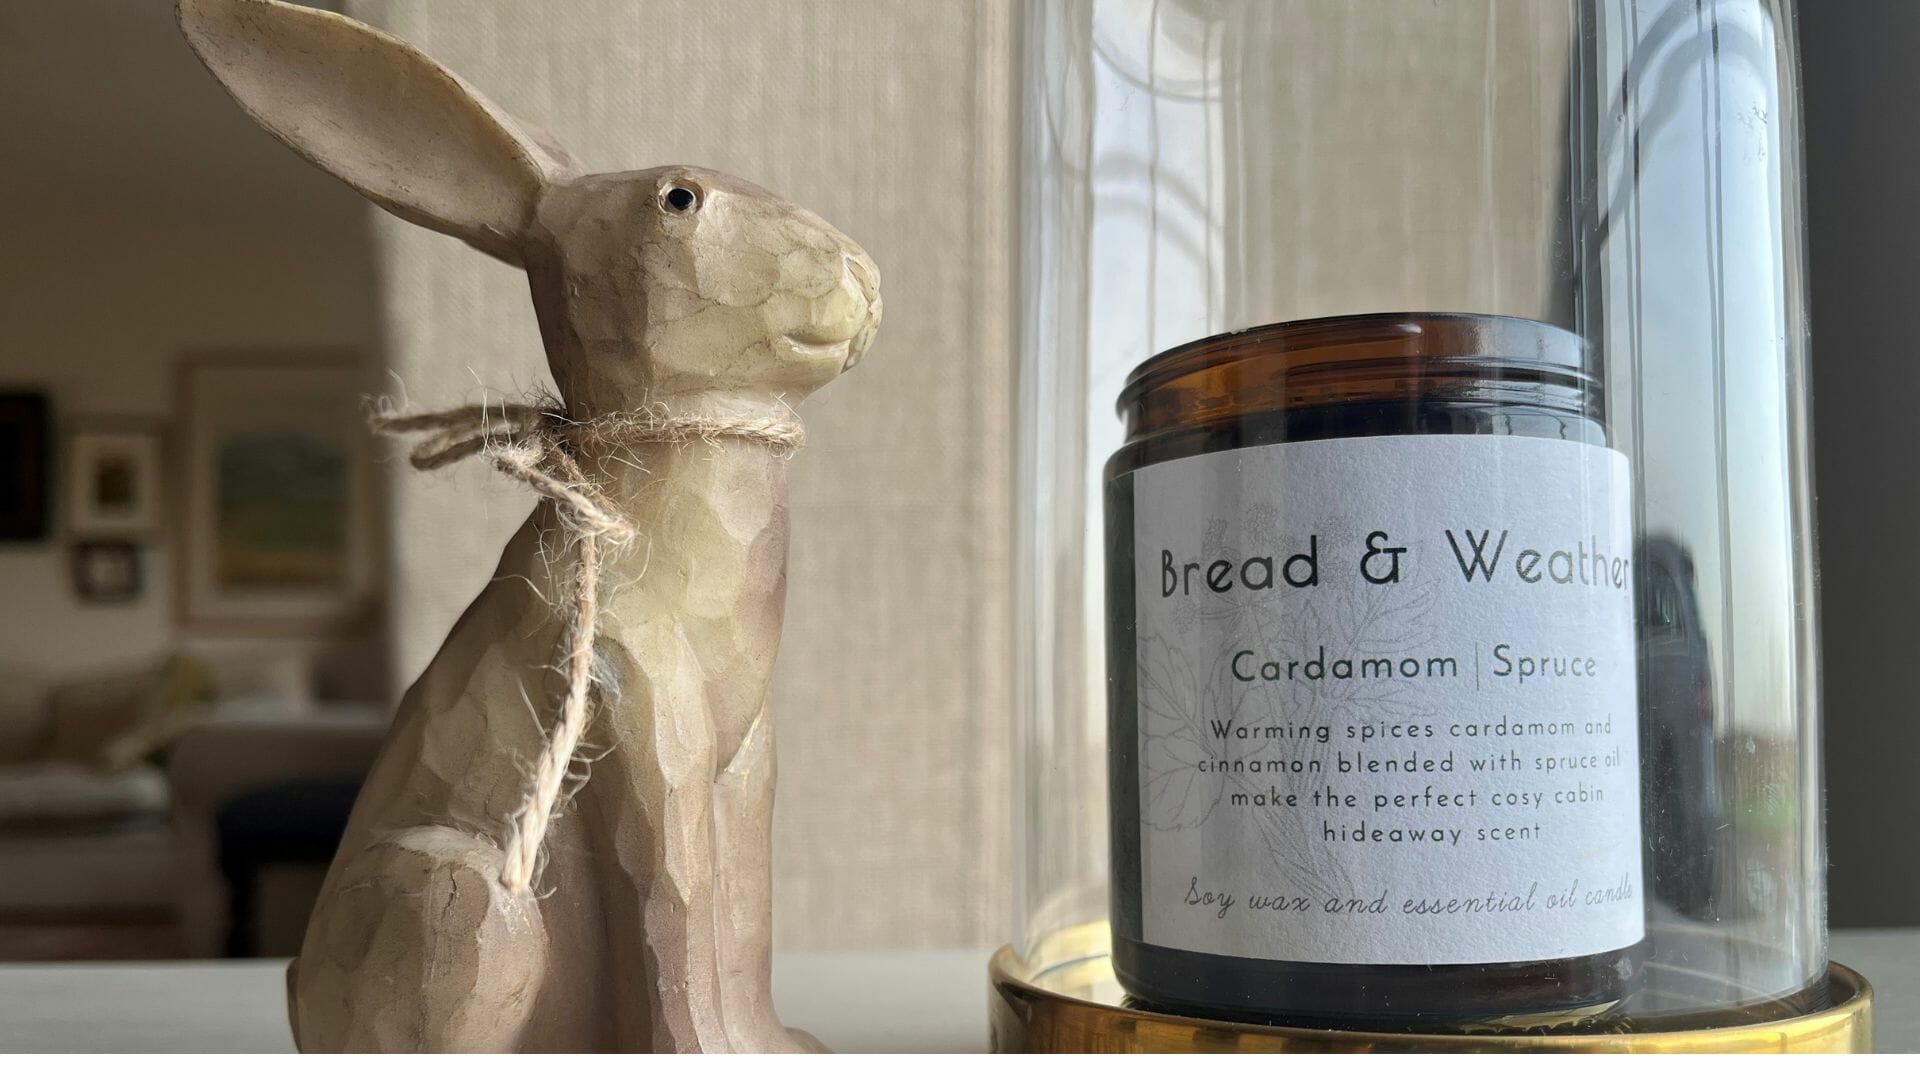 Candle in glass dome with wooden hare